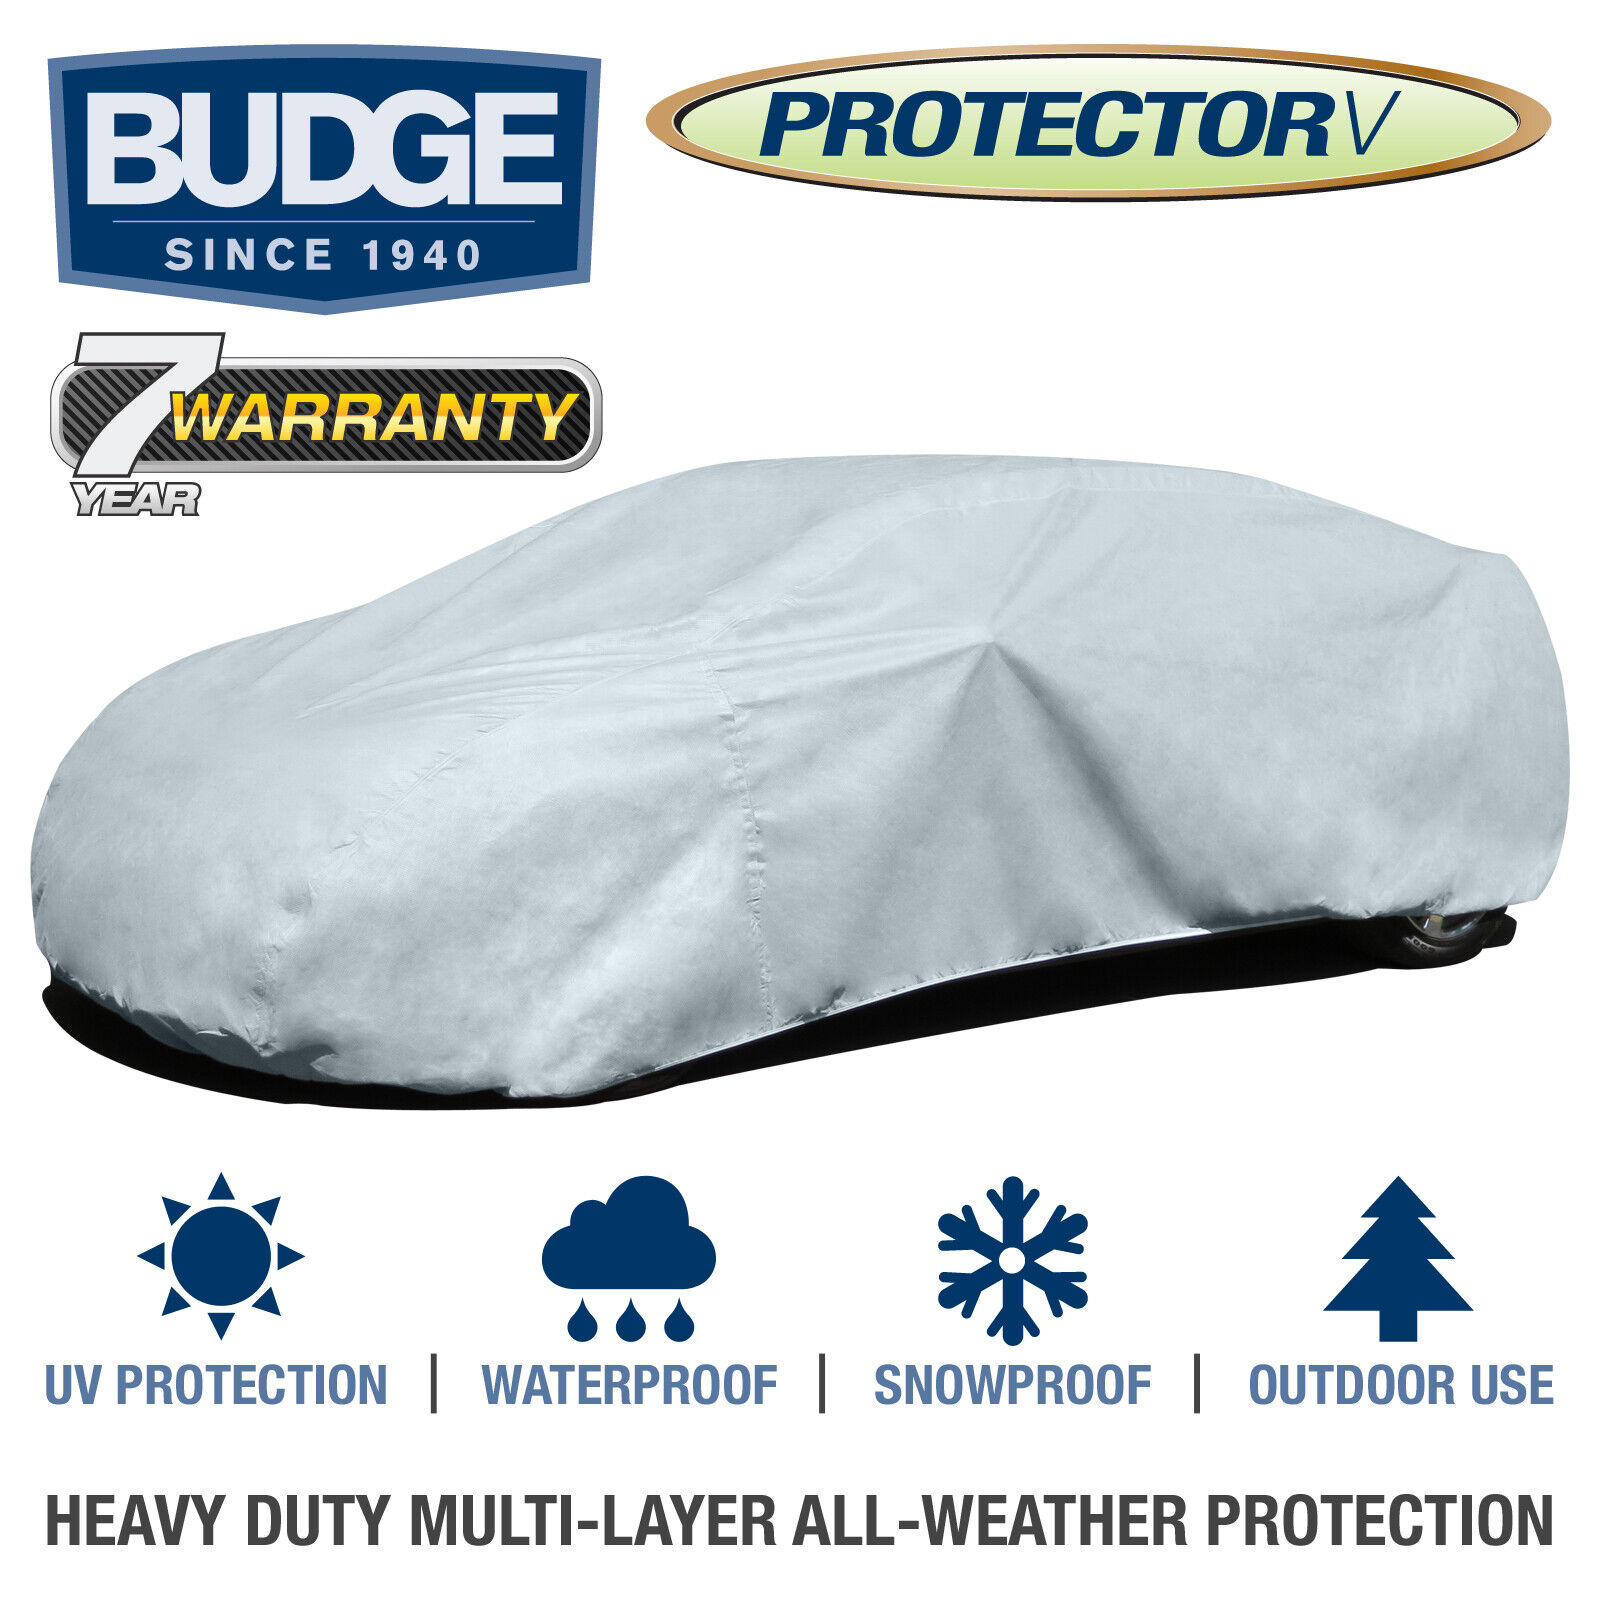 Budge Protector V Car Cover Fits Chevrolet Corvette 2003| Waterproof |Breathable